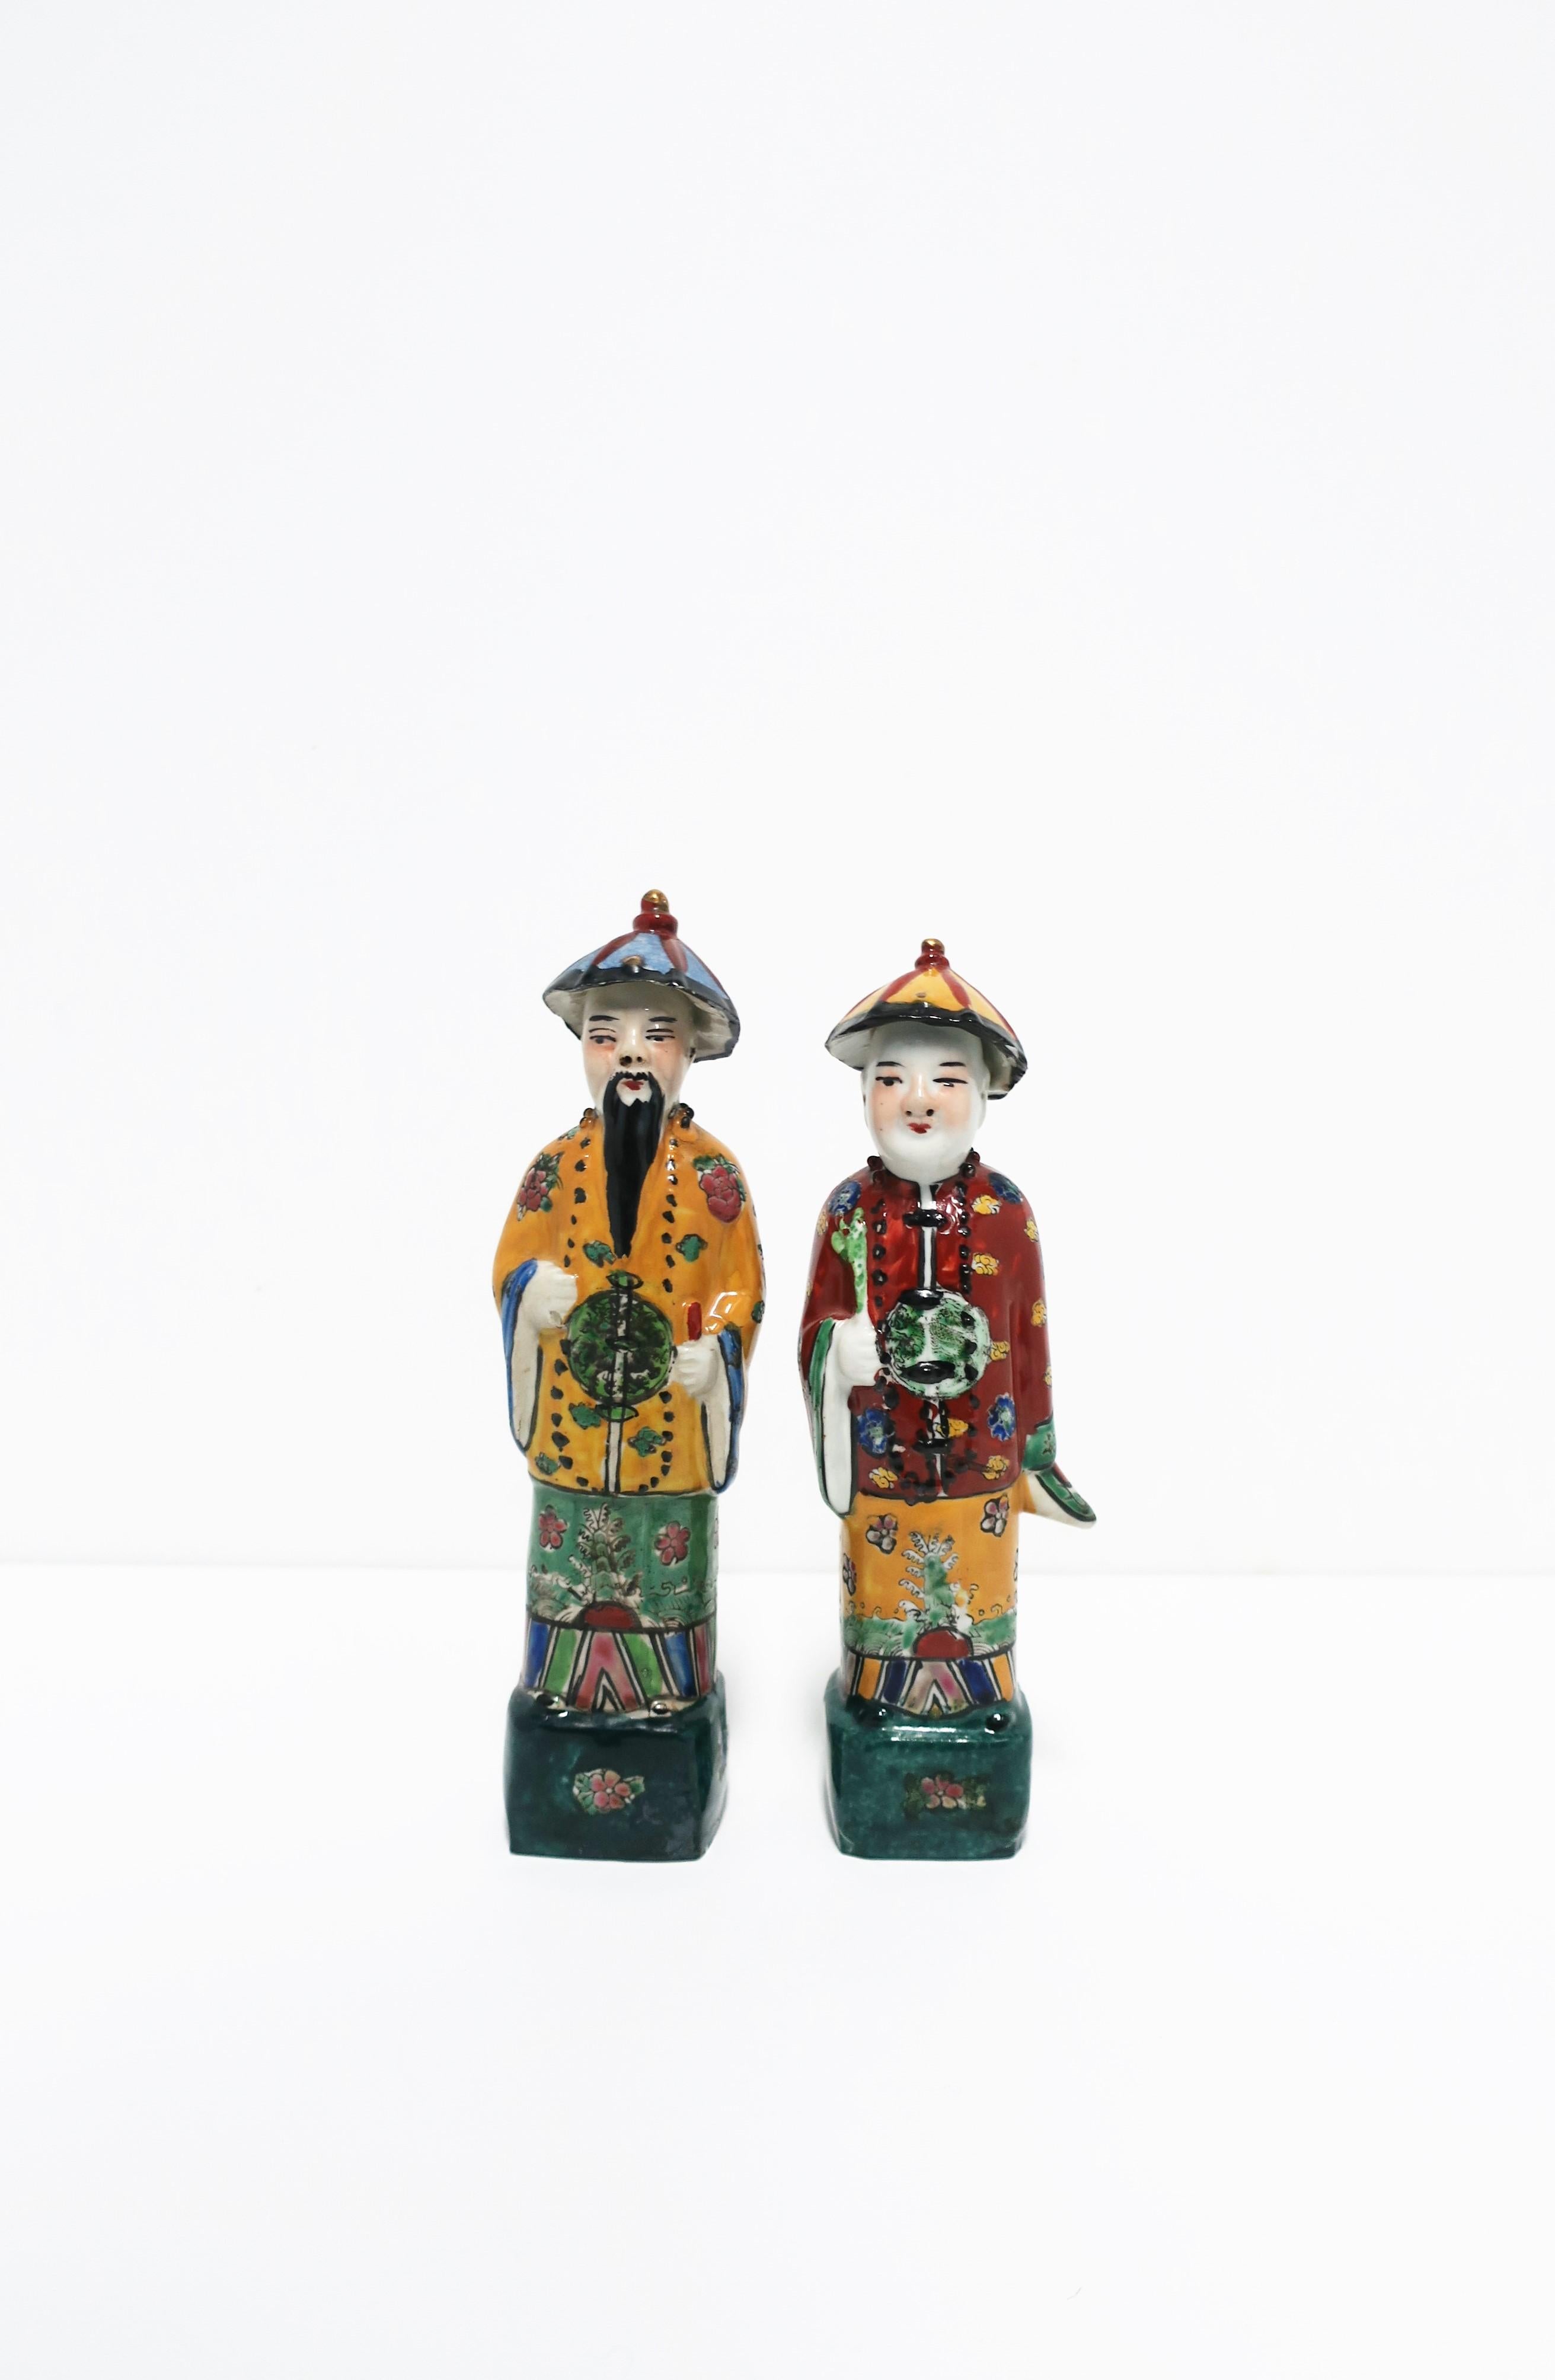 A beautiful set of two (2) Chinese porcelain Qing style male figures, circa 20th century. Painted in rich colors highlighting their robes, hats, and beaded necklaces. Colors include: Green, teal, black, yellow, gold, red, and blue. Stamp marking on